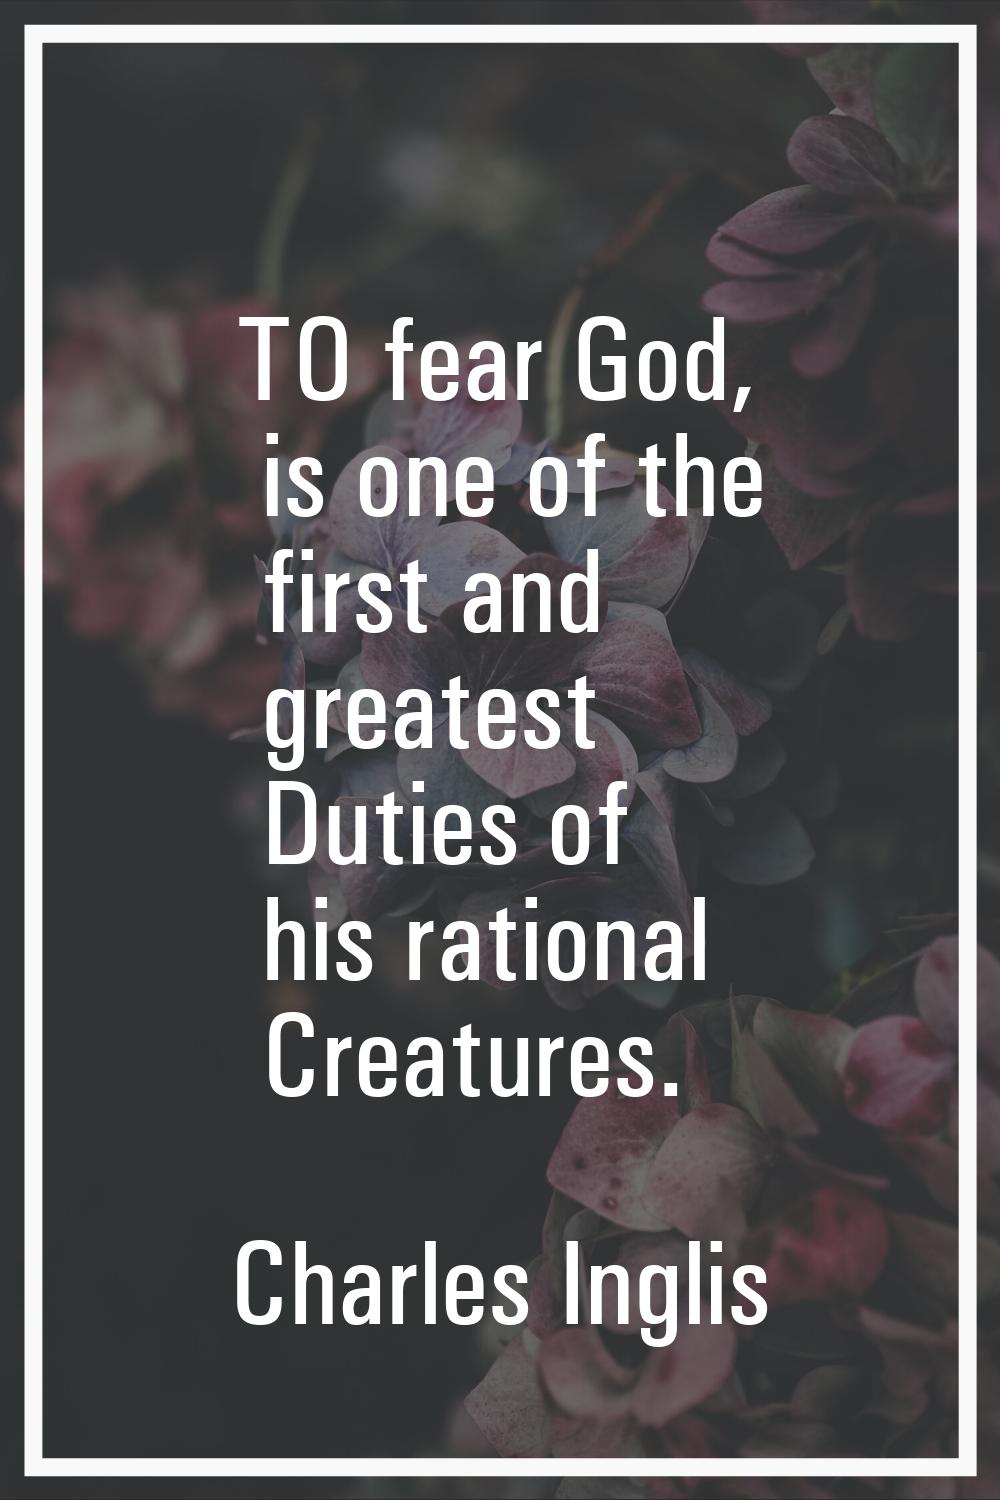 TO fear God, is one of the first and greatest Duties of his rational Creatures.